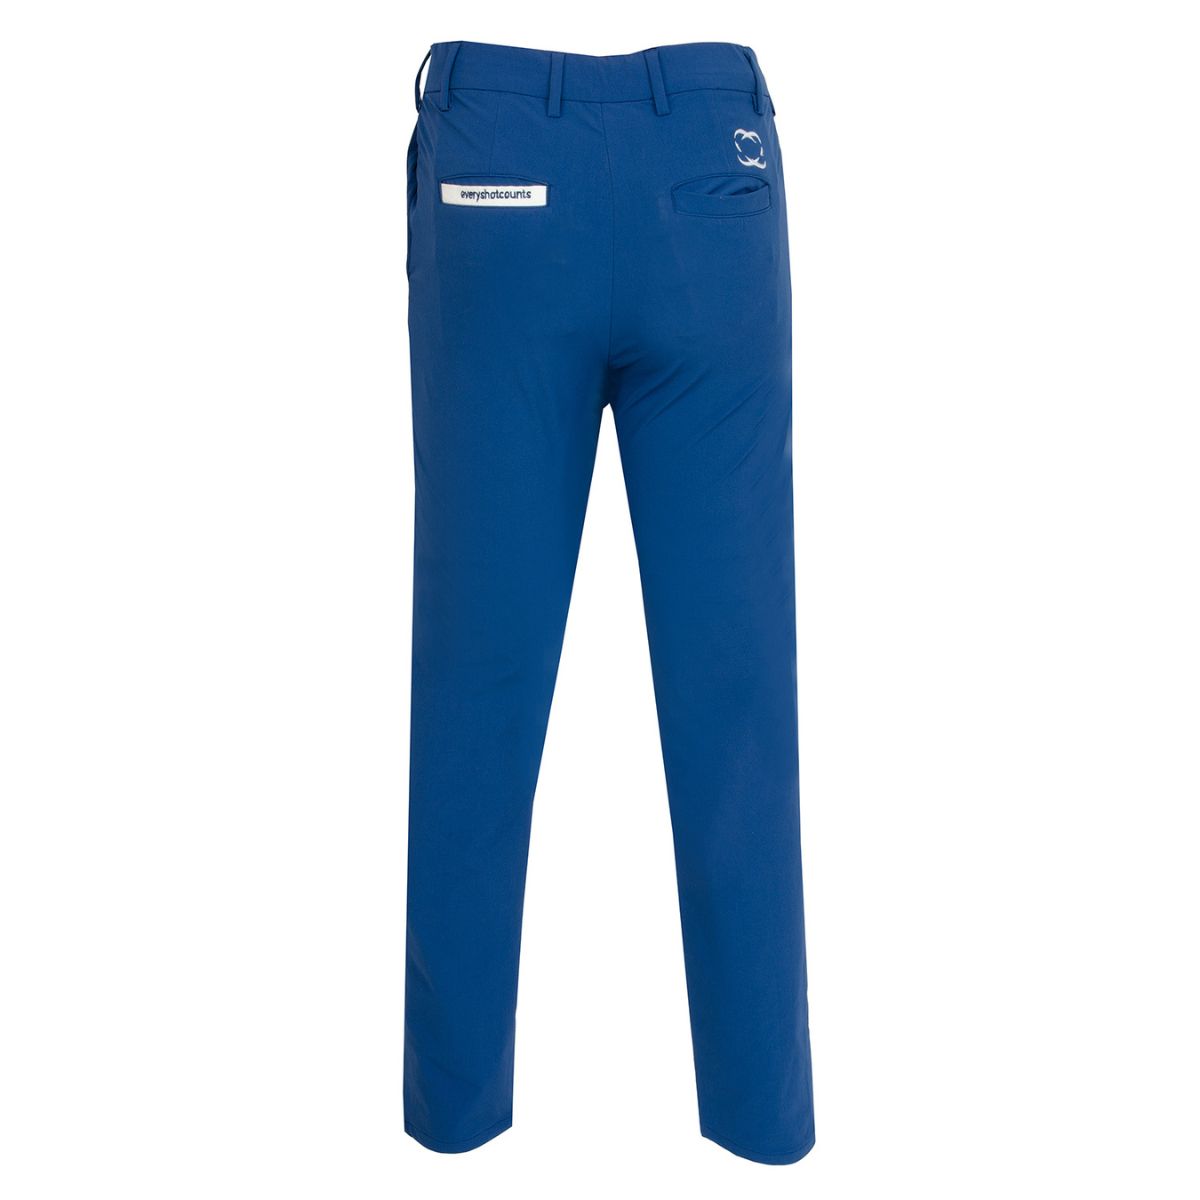 Junior Golf Clothing, golf clothes for kids. Trousers, polos and more ...